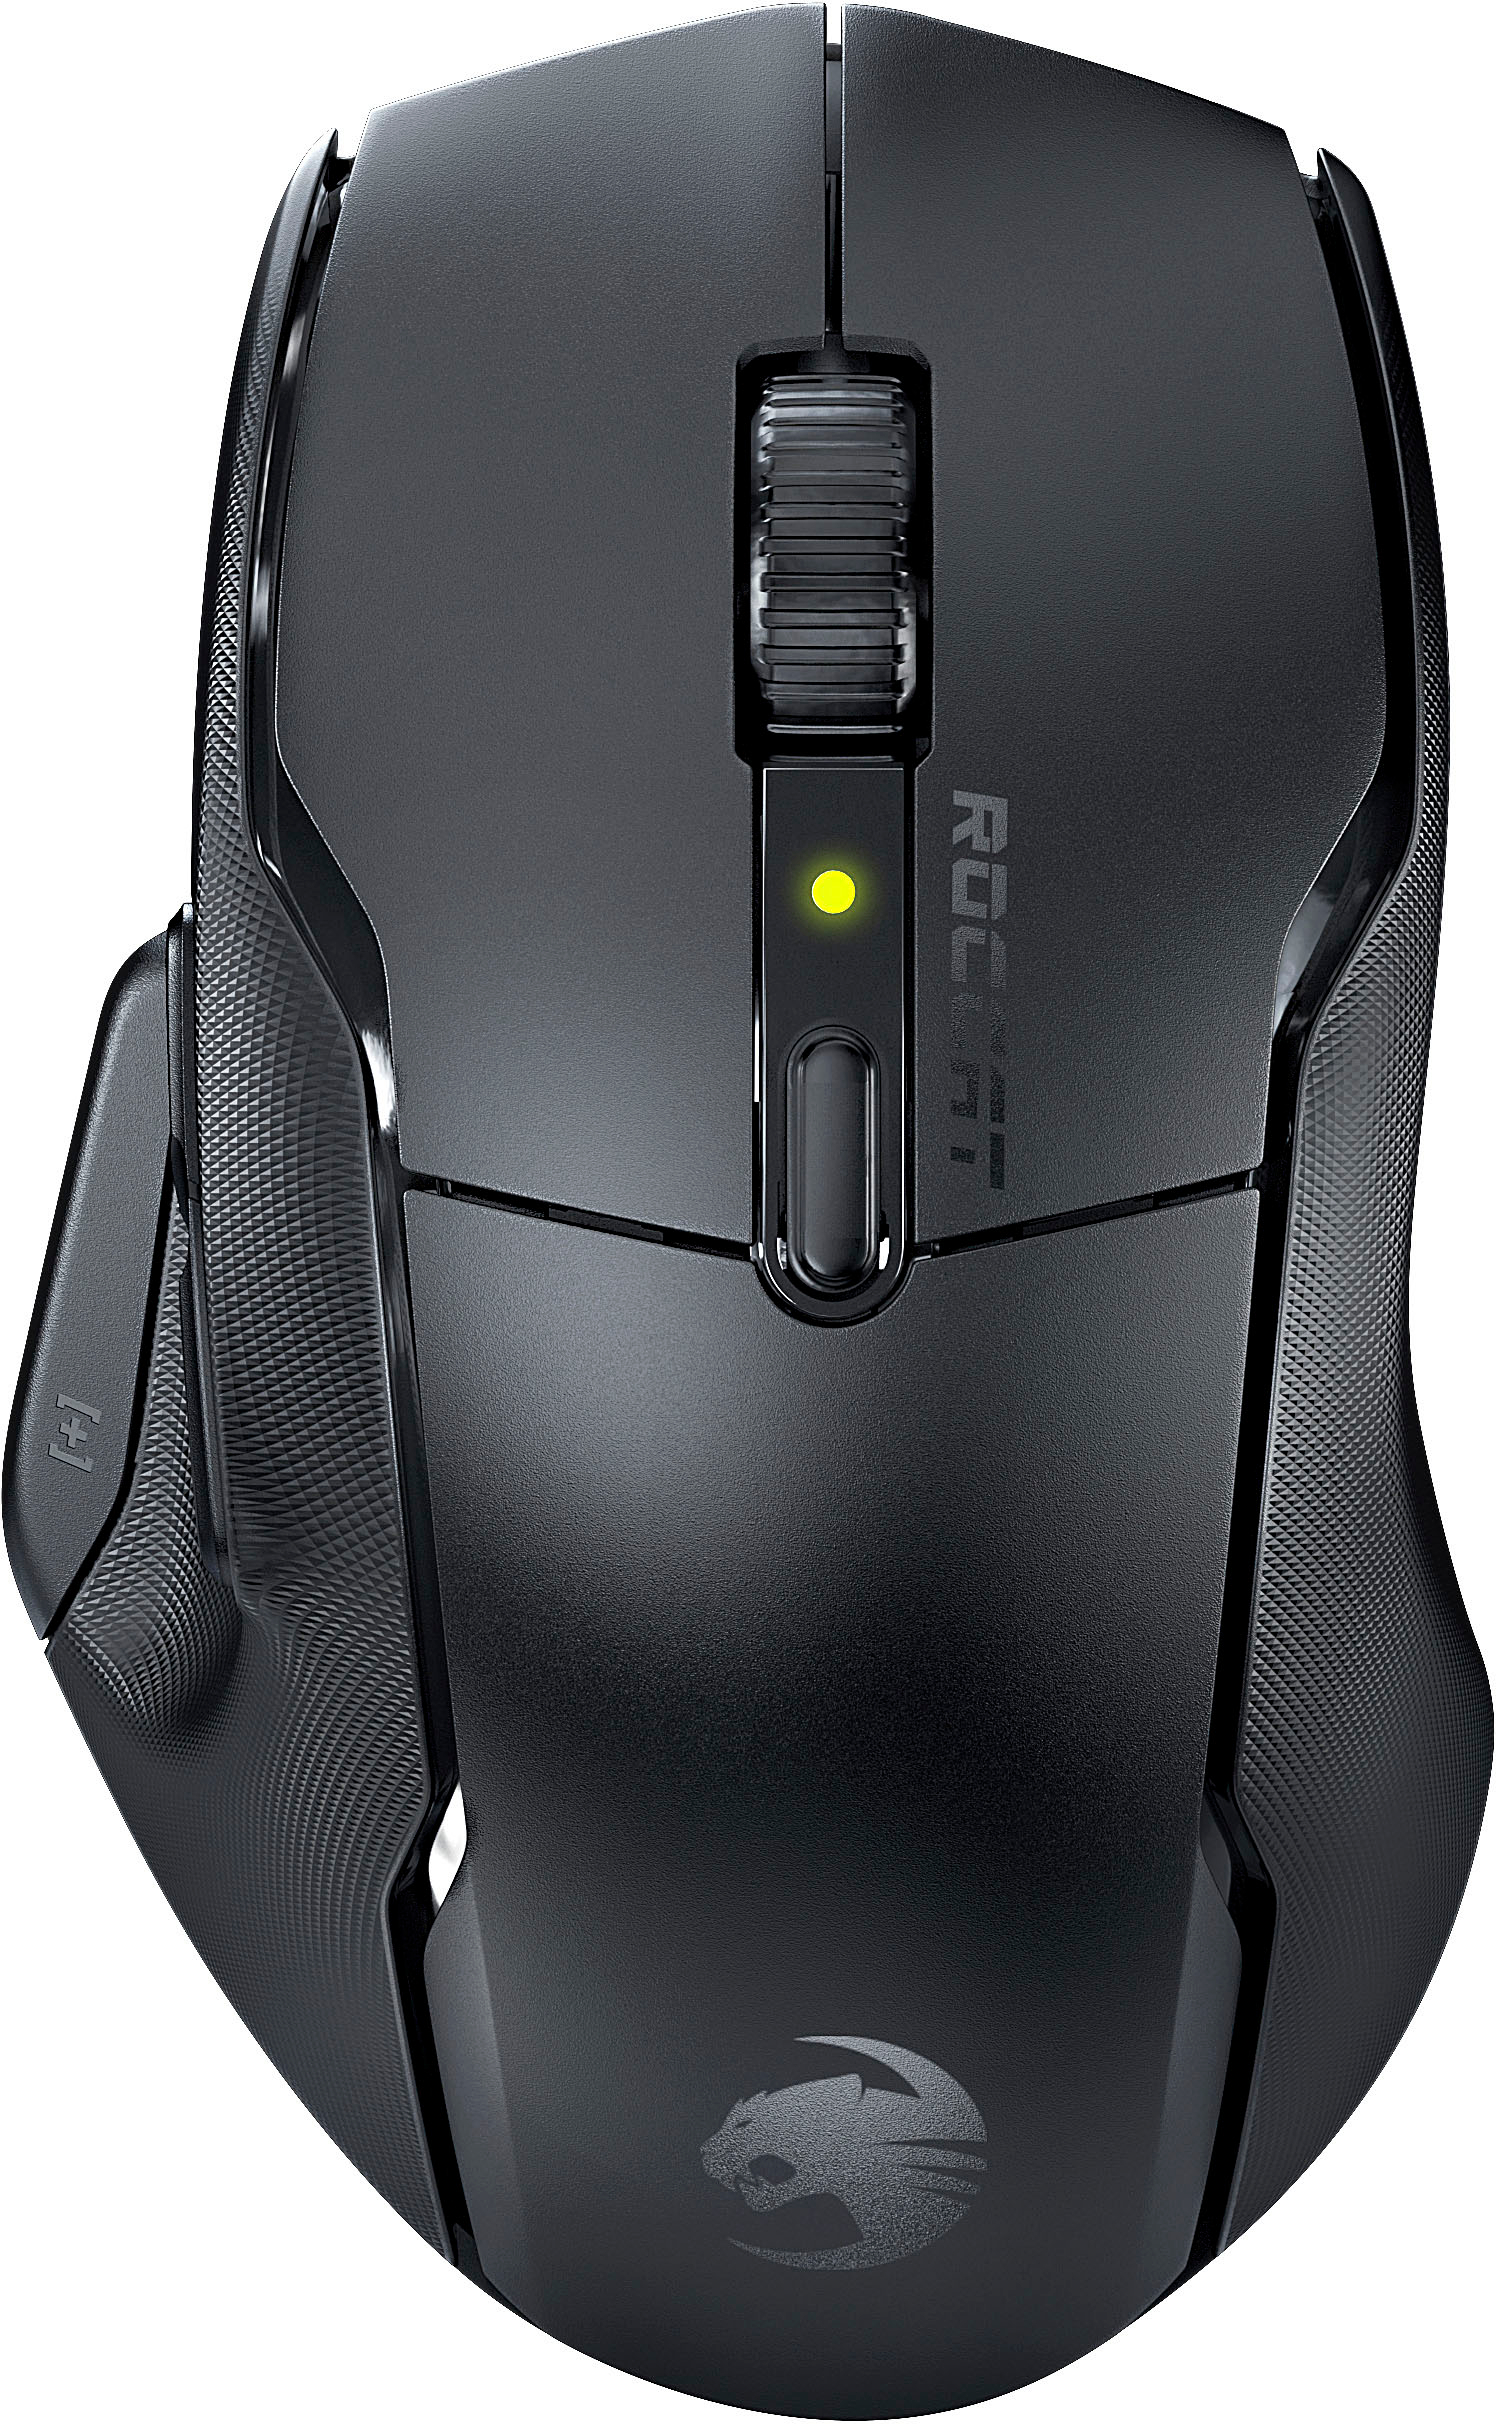 Buy Black with Air Optical Programmable Wireless Ergonomic Kone ROC-11-450-01 ROCCAT - Gaming Best Mouse Button Design